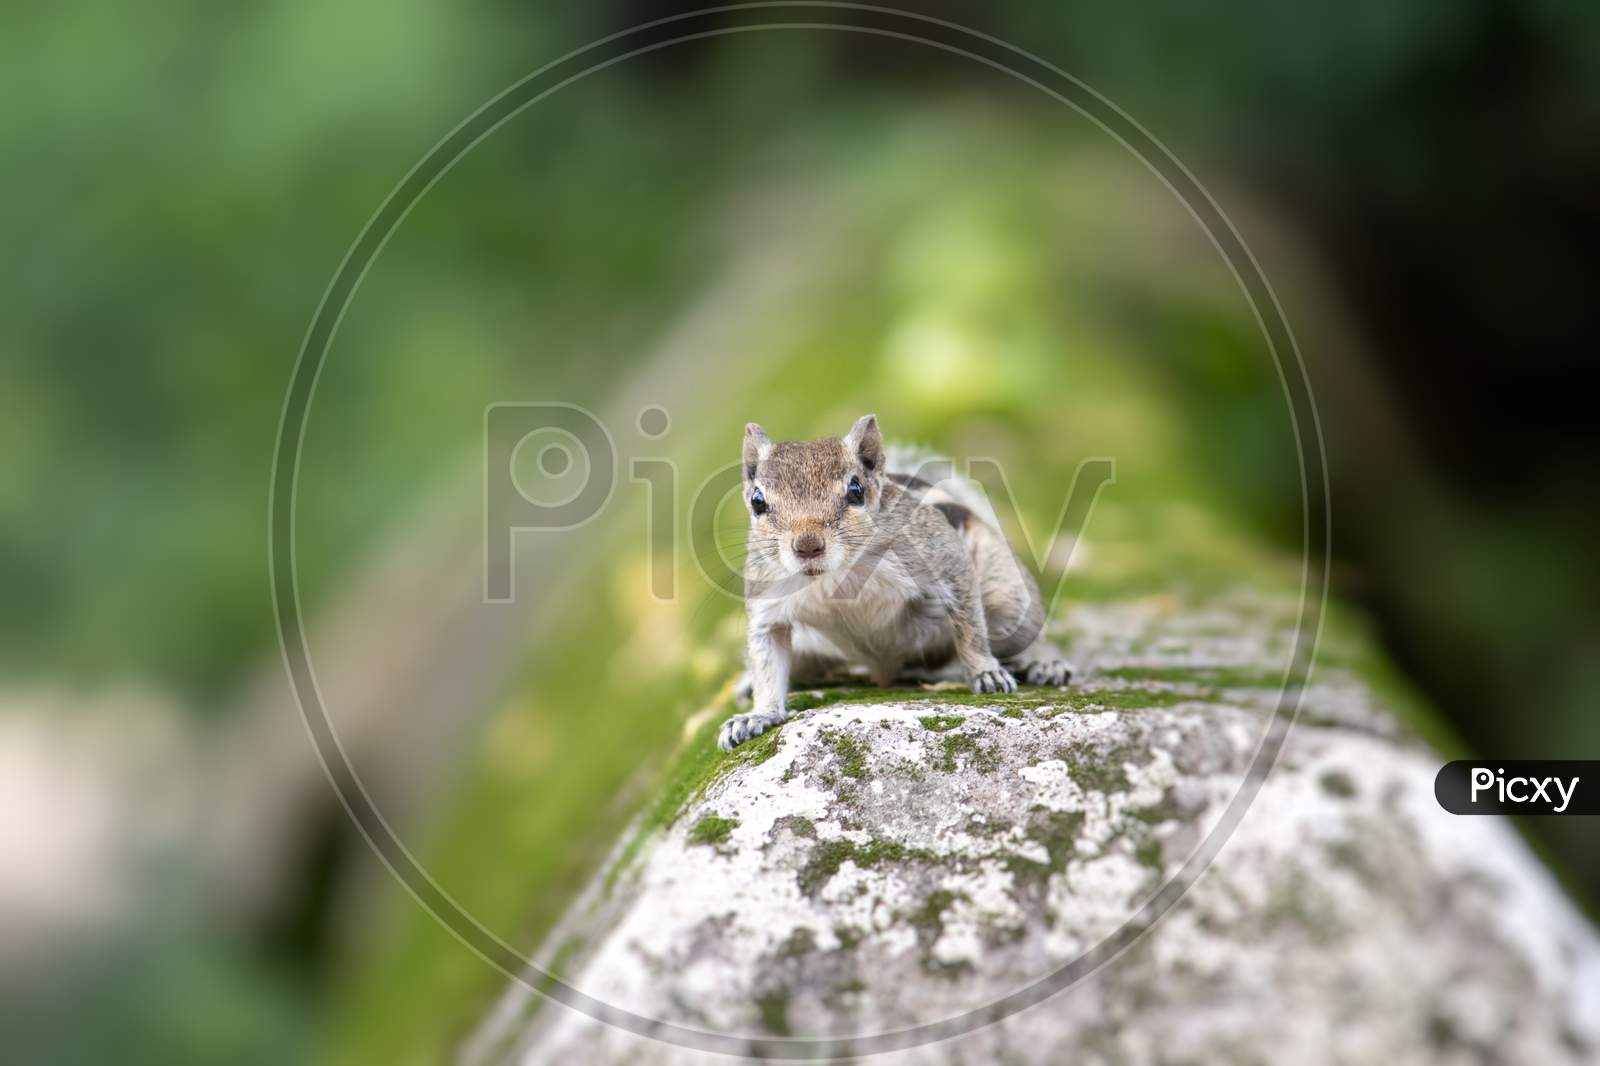 Indian Palm Squirrel Or Three Striped Squirrel Looking At The Camera